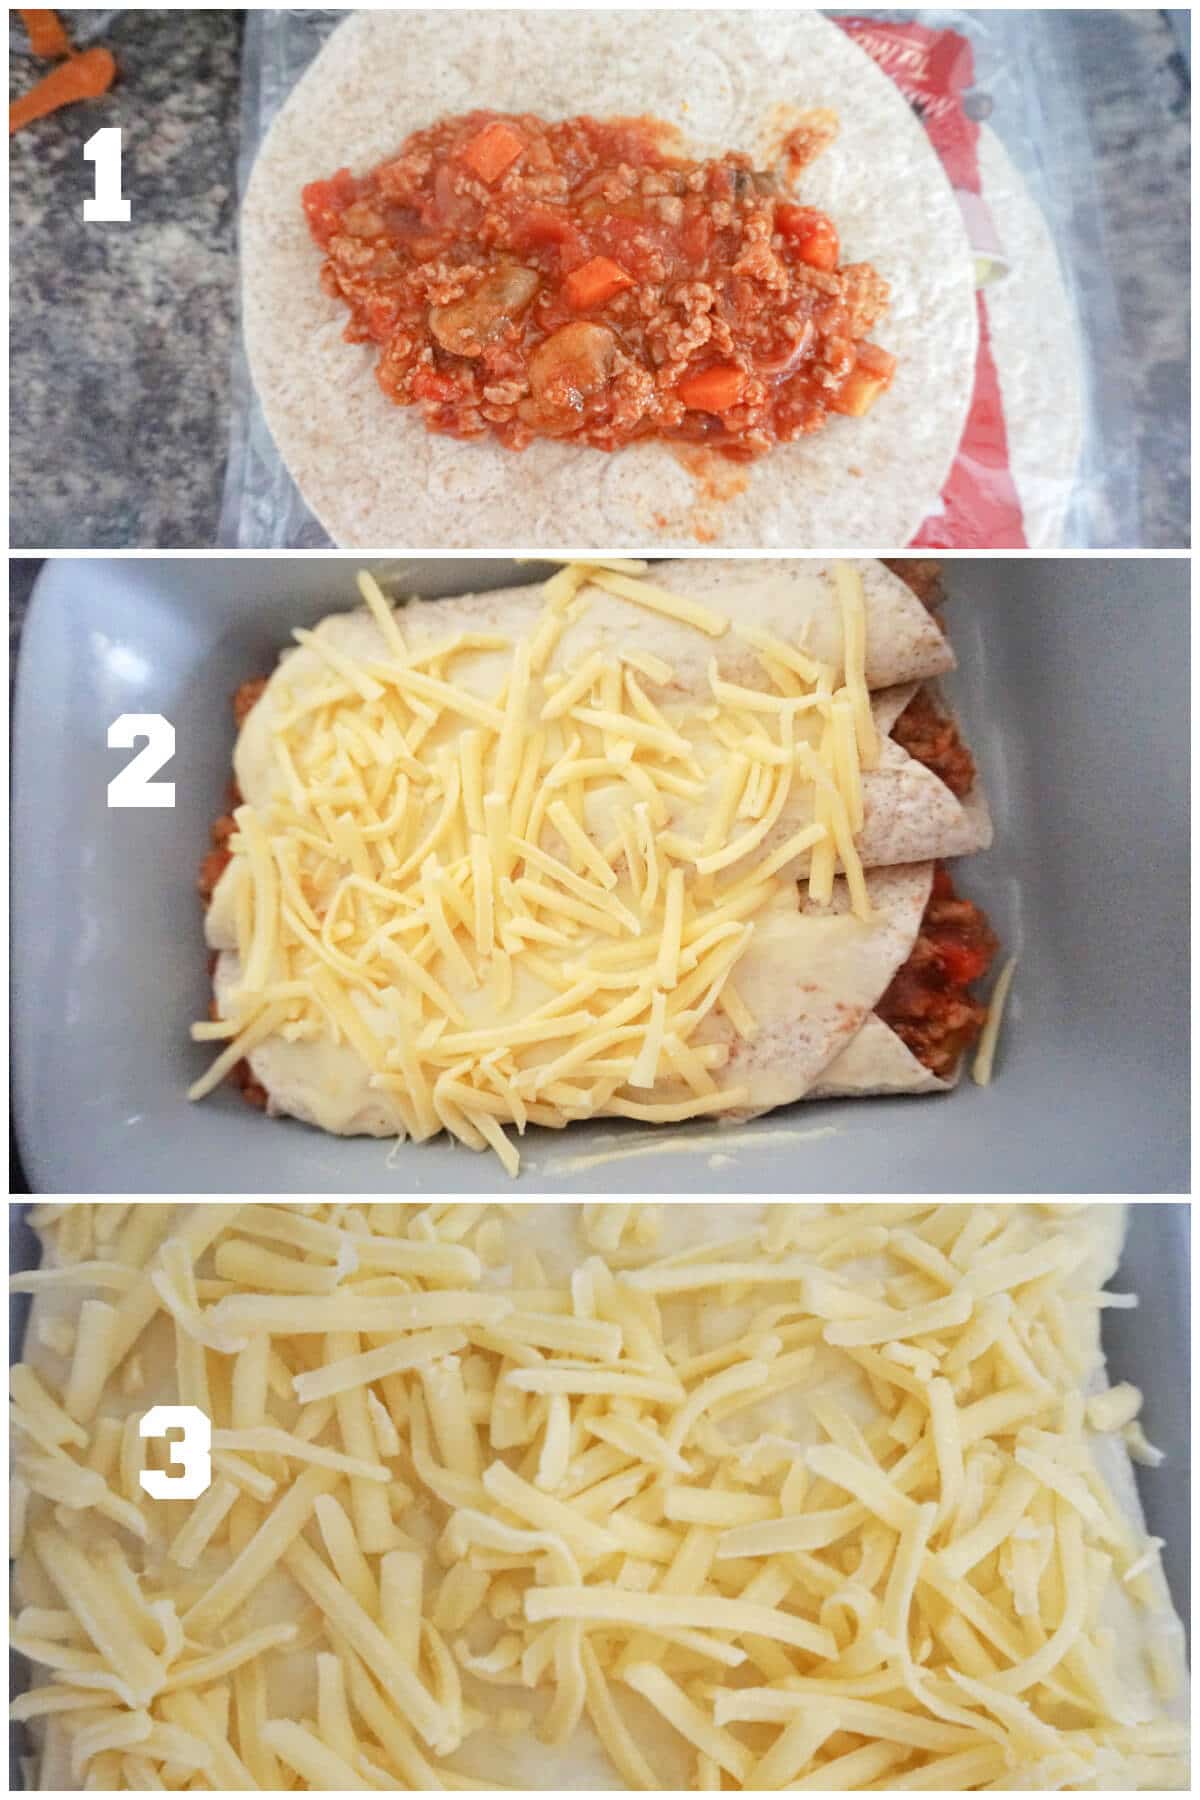 Collage of 3 photos to show how to assemble the enchiladas.